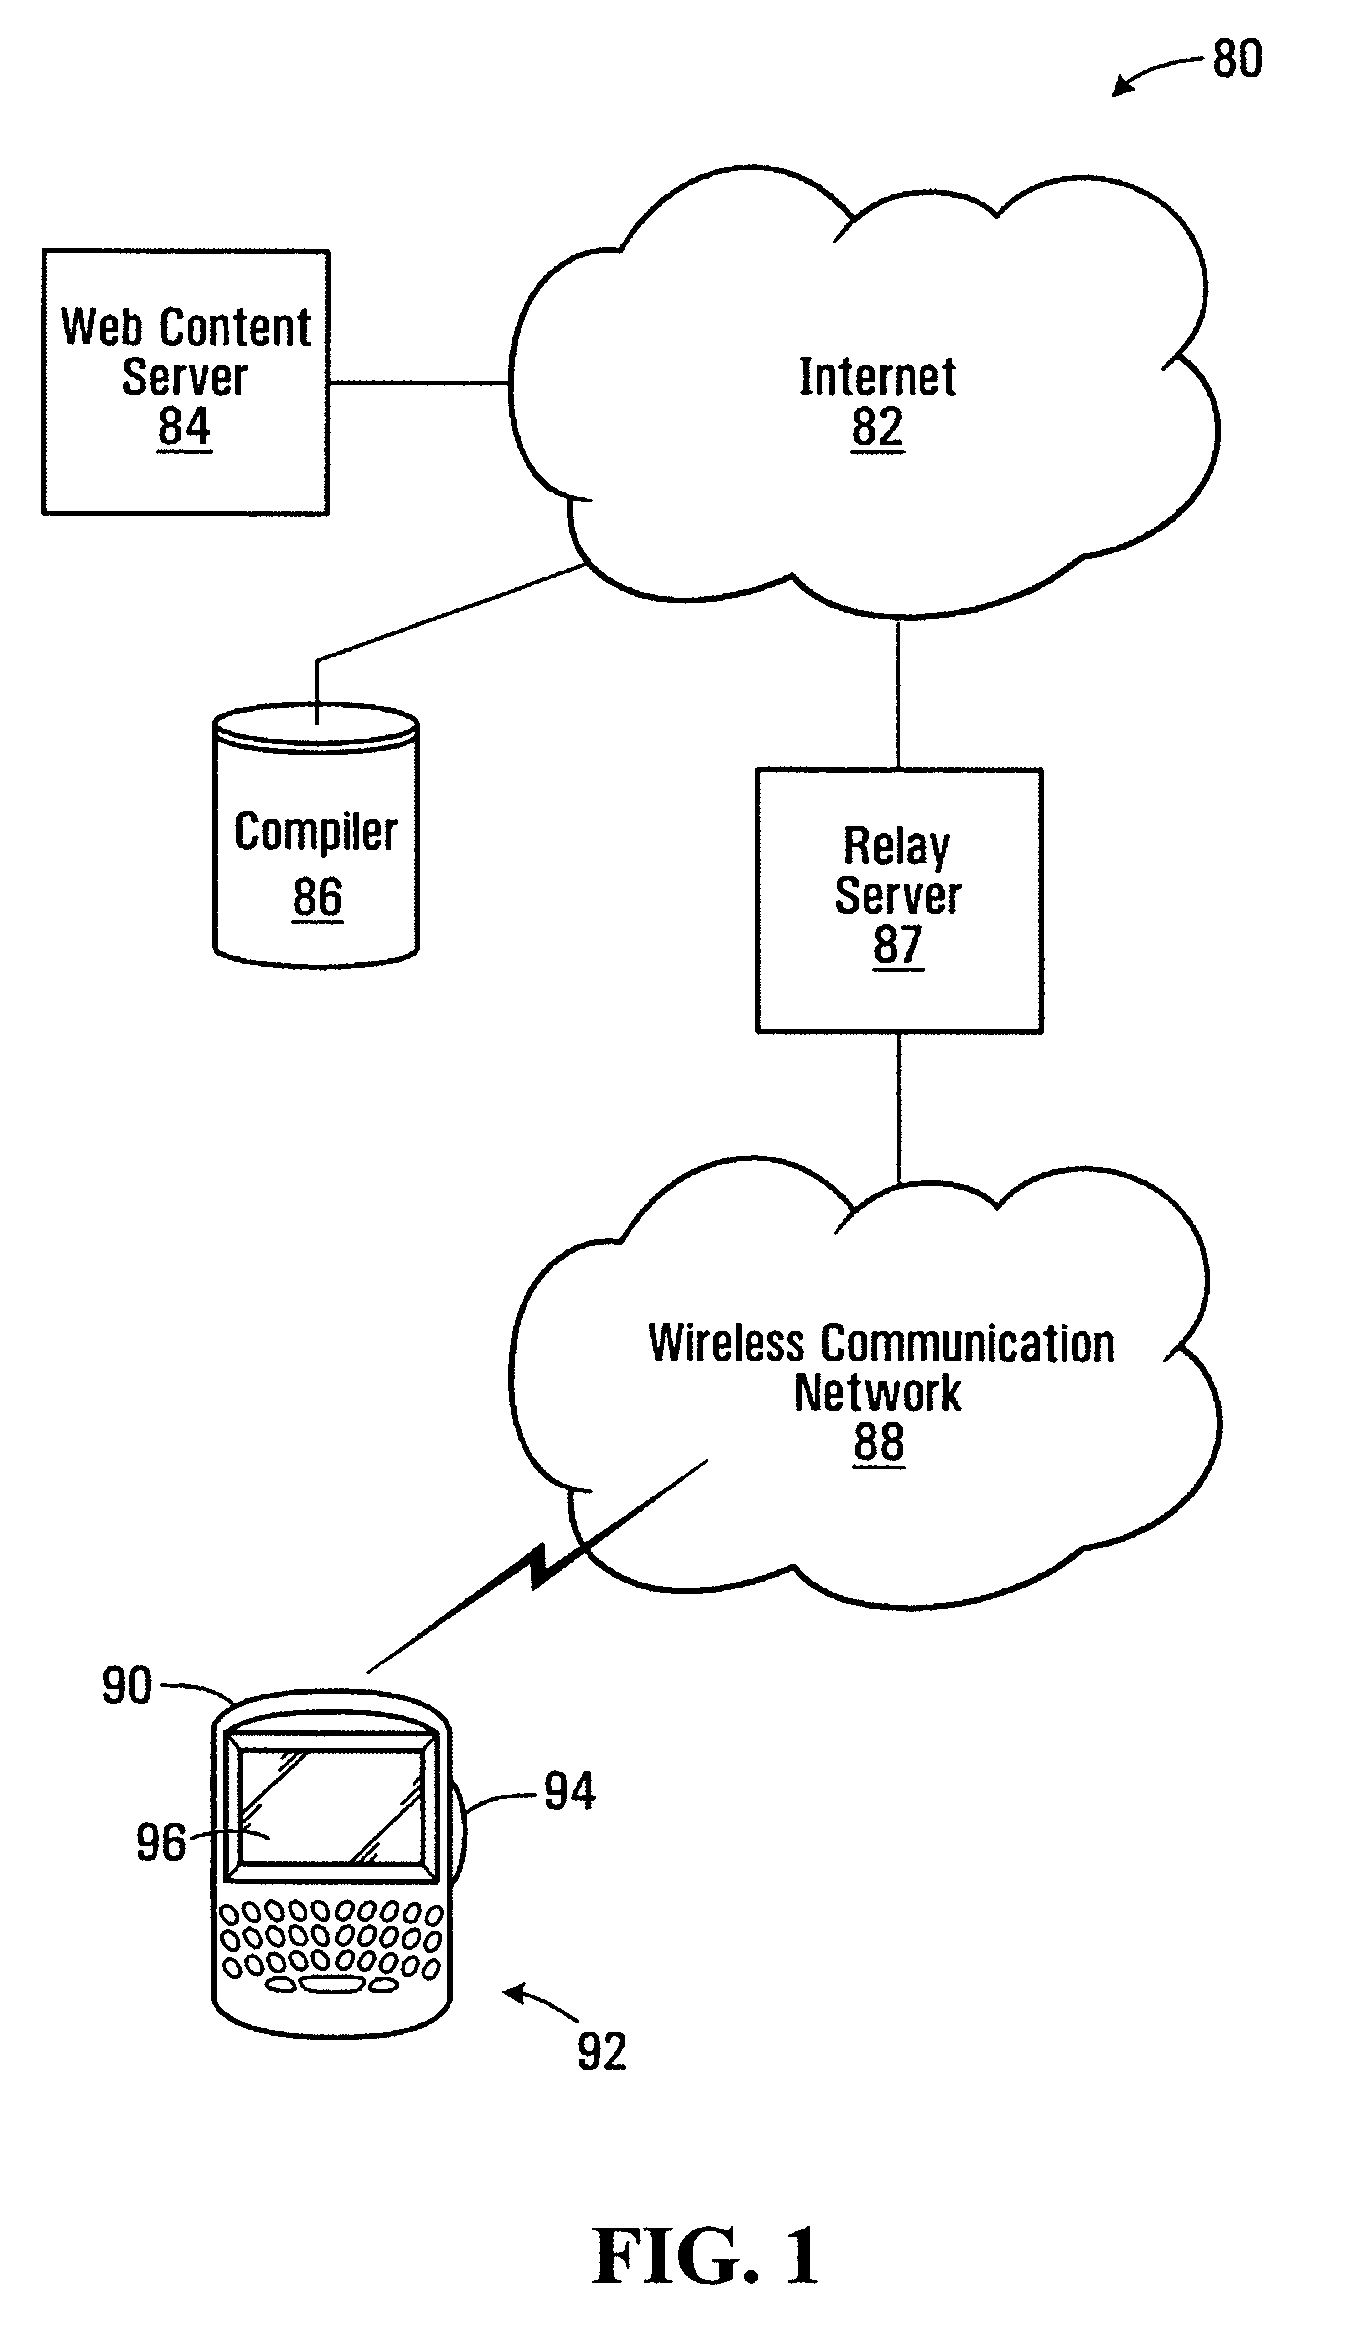 Displaying using graphics display language and native UI objects